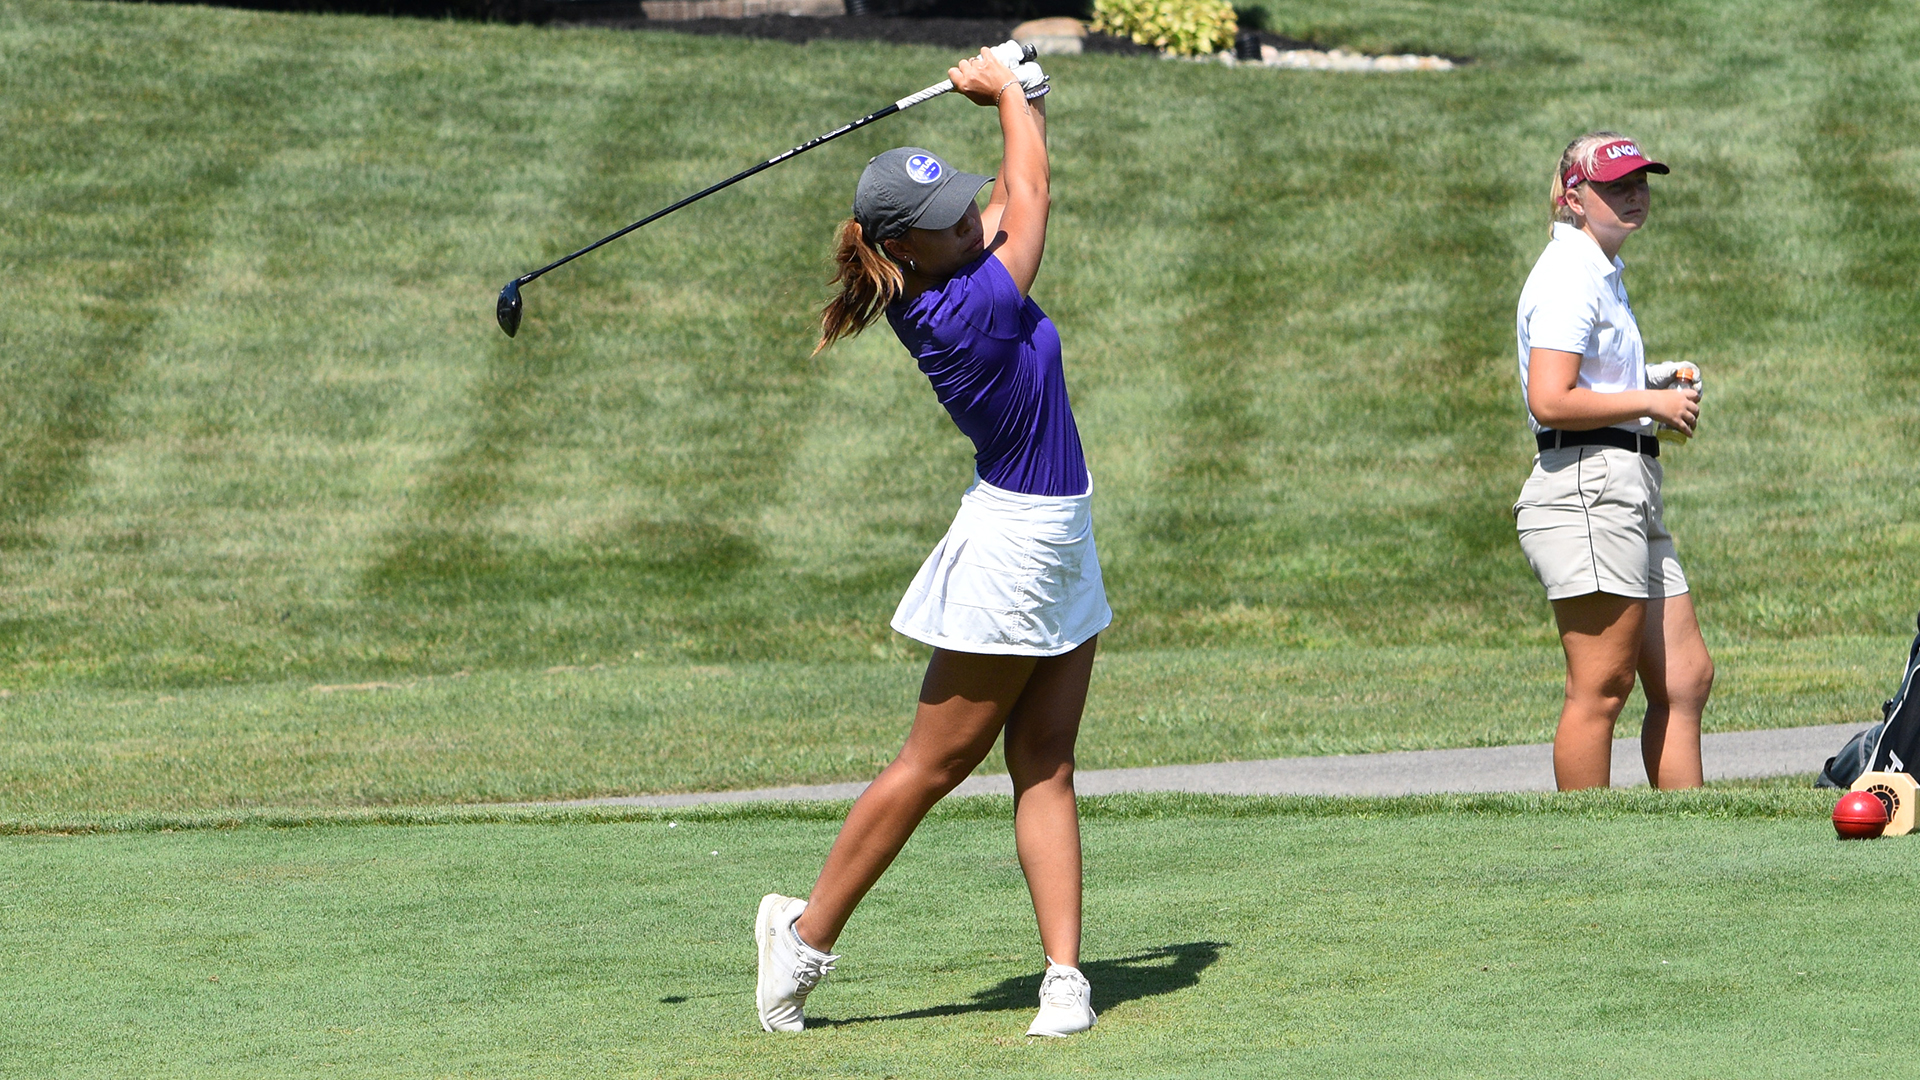 Lim Wins Third-Straight CL Golfer-of-the-Week Honor